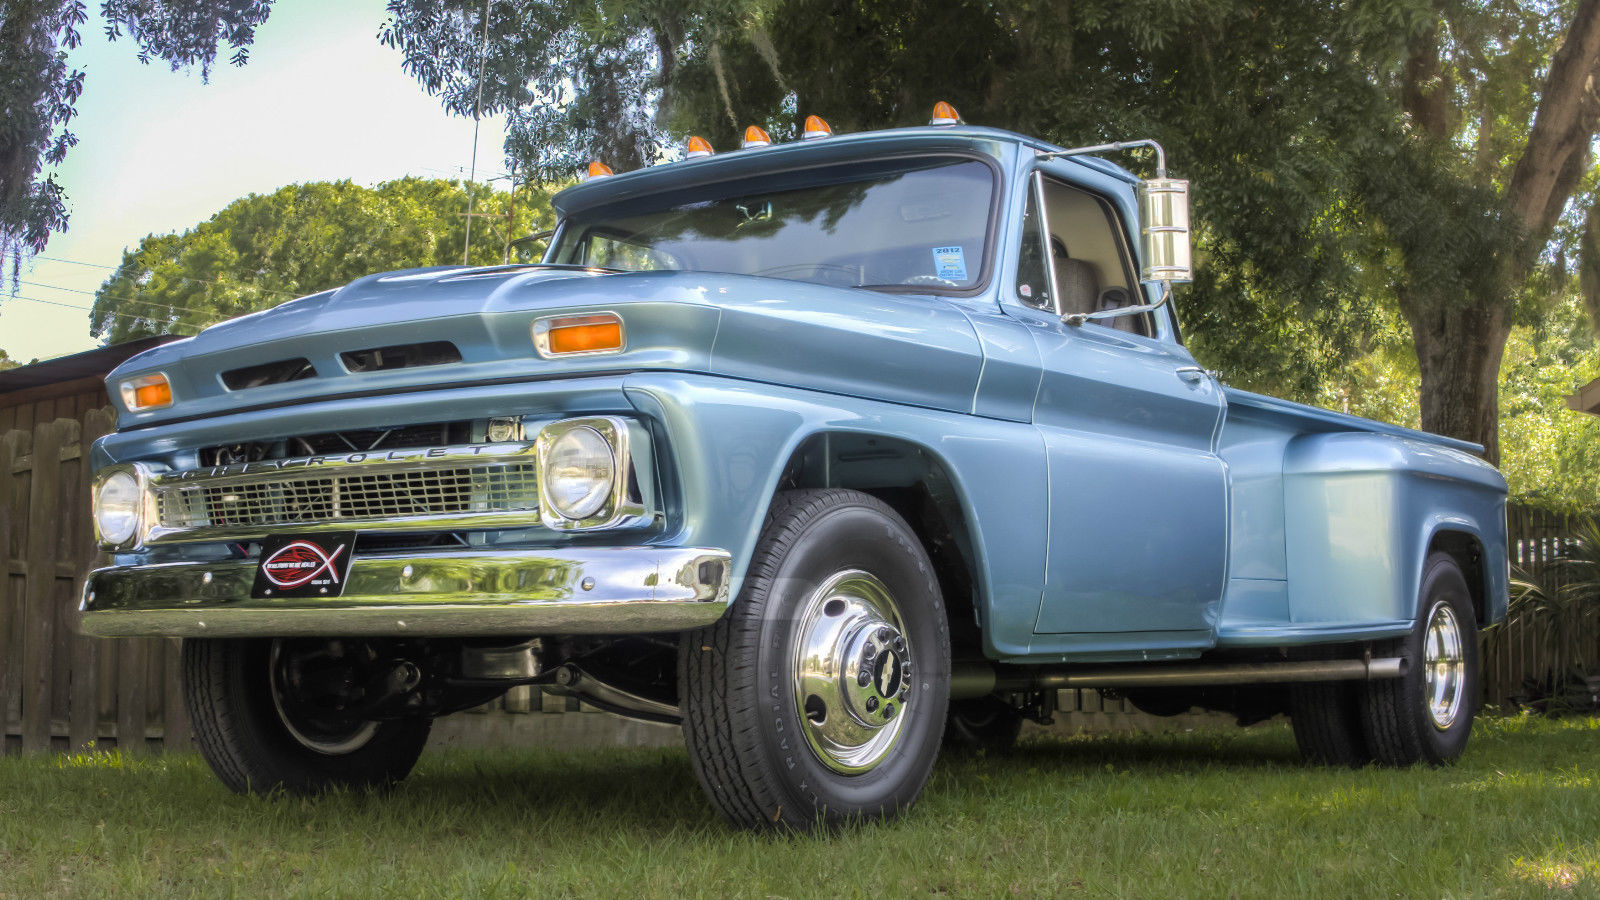 This 1964 Chevy Dually Is One Of The Coolest Mid-1960s Trucks We Have Lusted After In A While